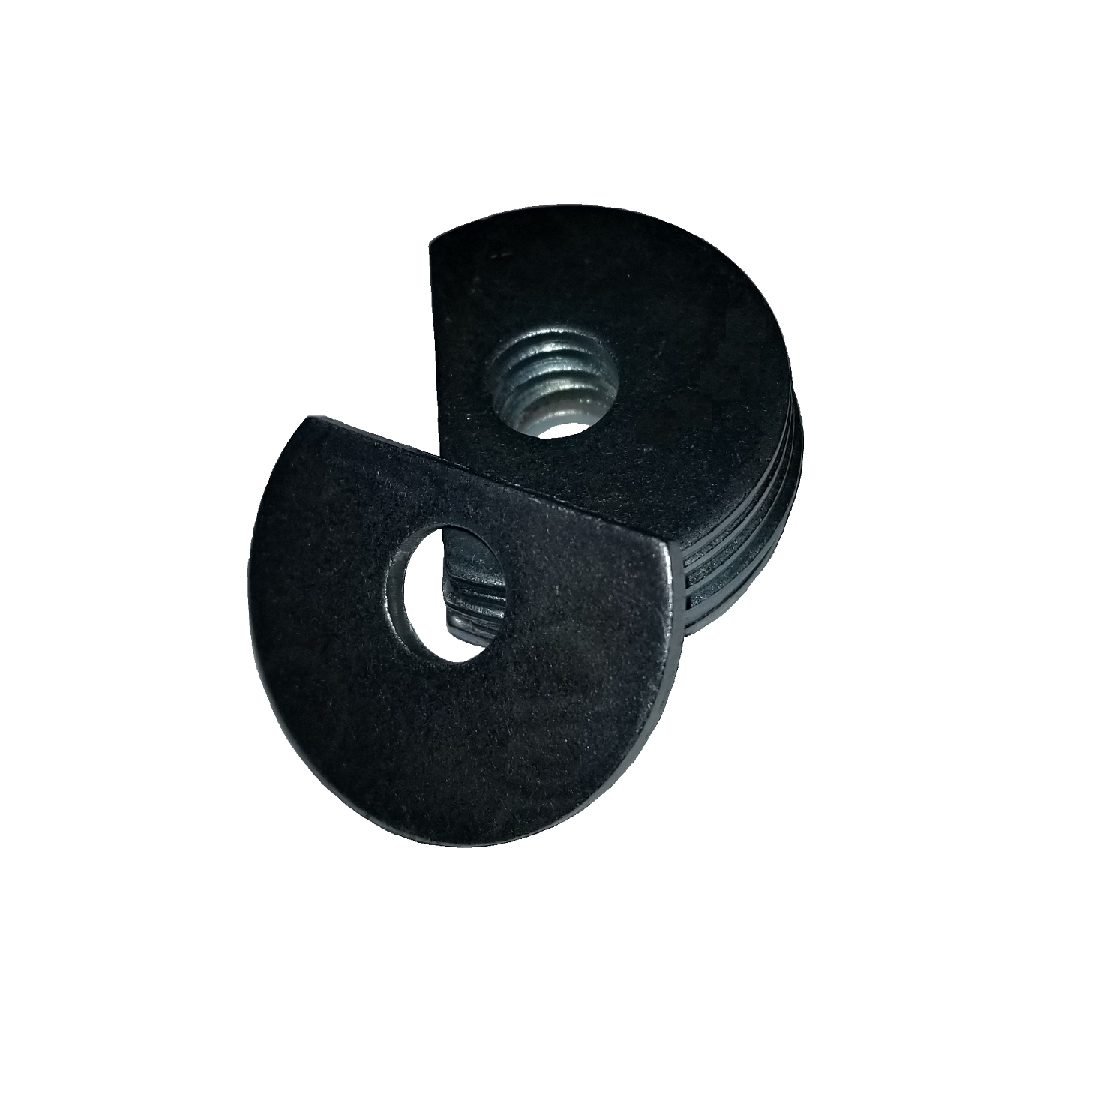 Clipped OD Washer - 0.836 ID, 1.468 OD, 0.125 Thick, Low Carbon Steel - Soft